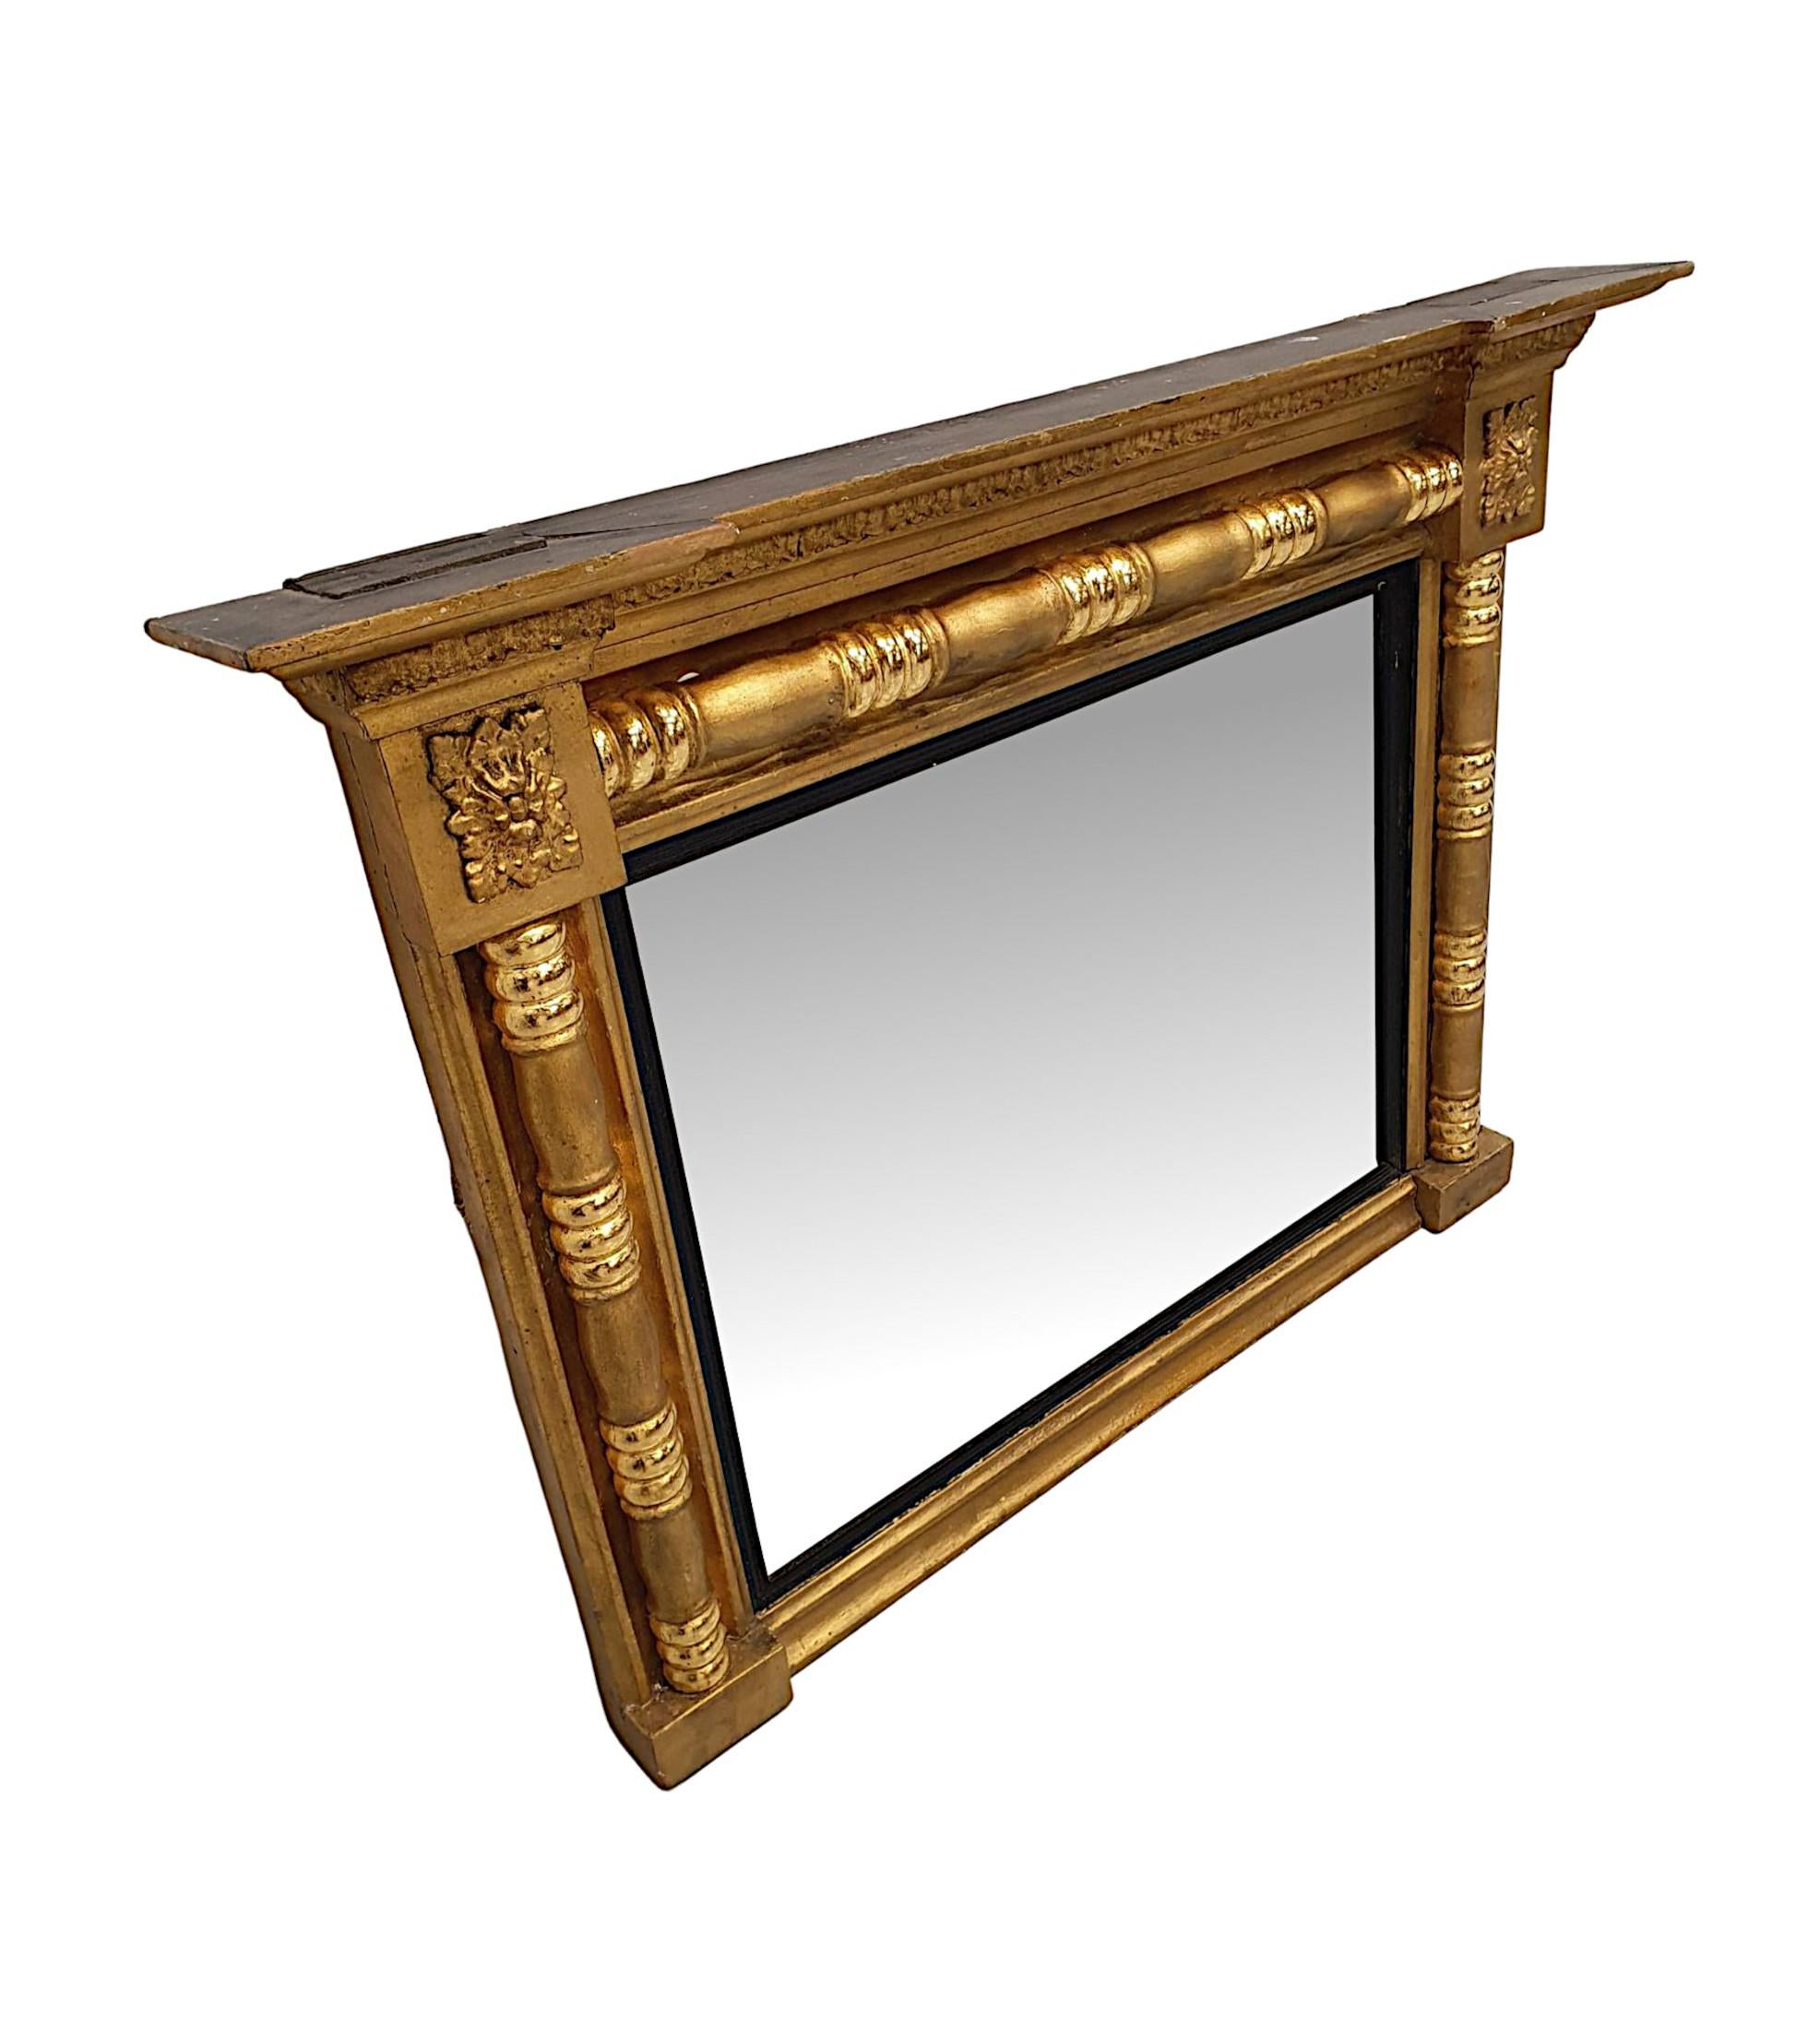 A gorgeous early 19th century giltwood overmantle mirror of neat proportions. The finely hand carved, moulded and fluted giltwood frame is surmounted with an overhanging broken pediment stepped cornice, raised above panelled frieze with beautifully